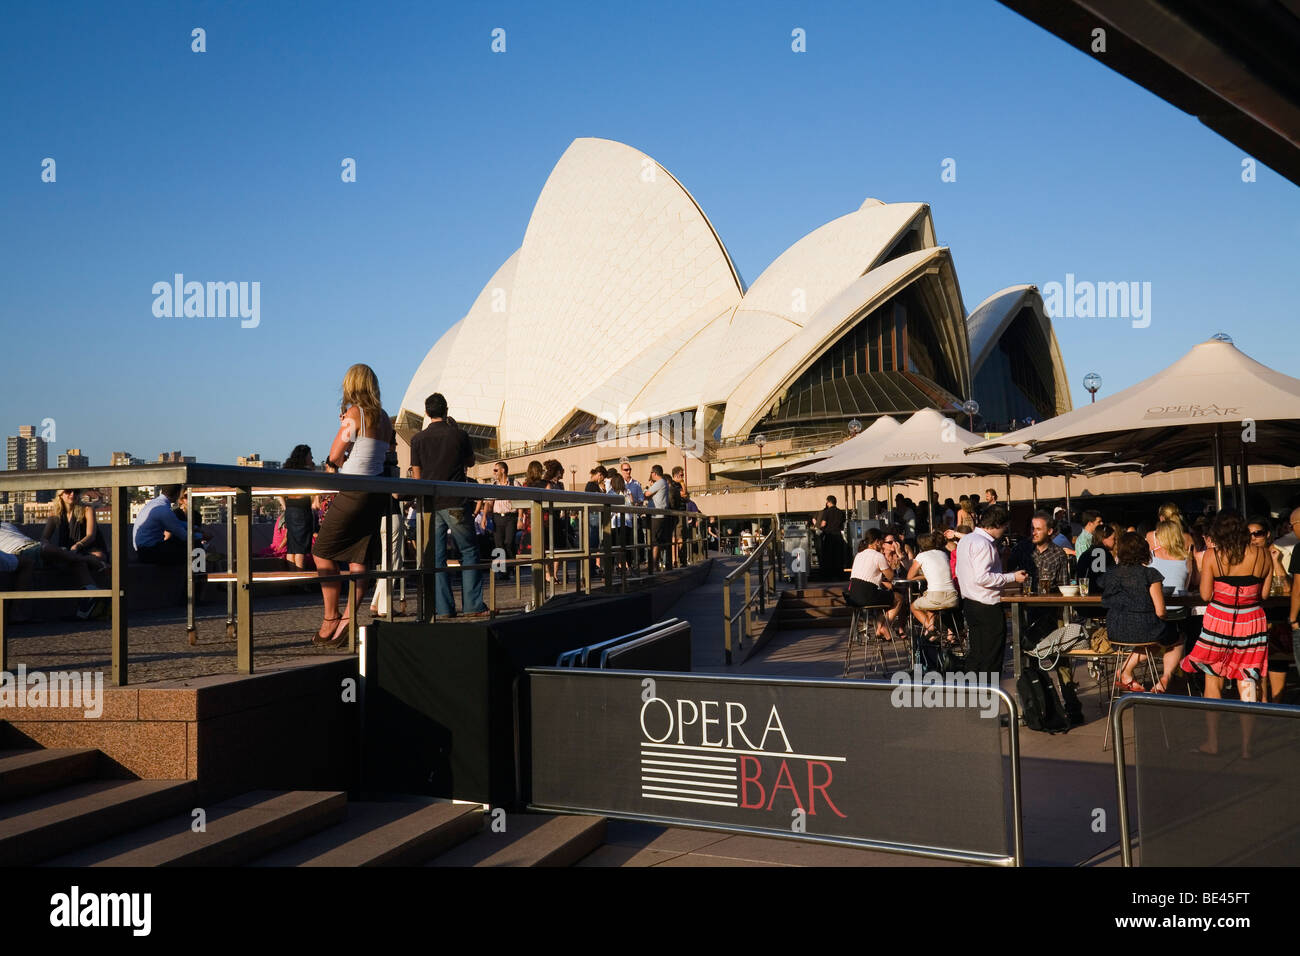 The Opera Bar next to the iconic Opera House on Sydney harbour. Circular Quay, Sydney, New South Wales, AUSTRALIA Stock Photo